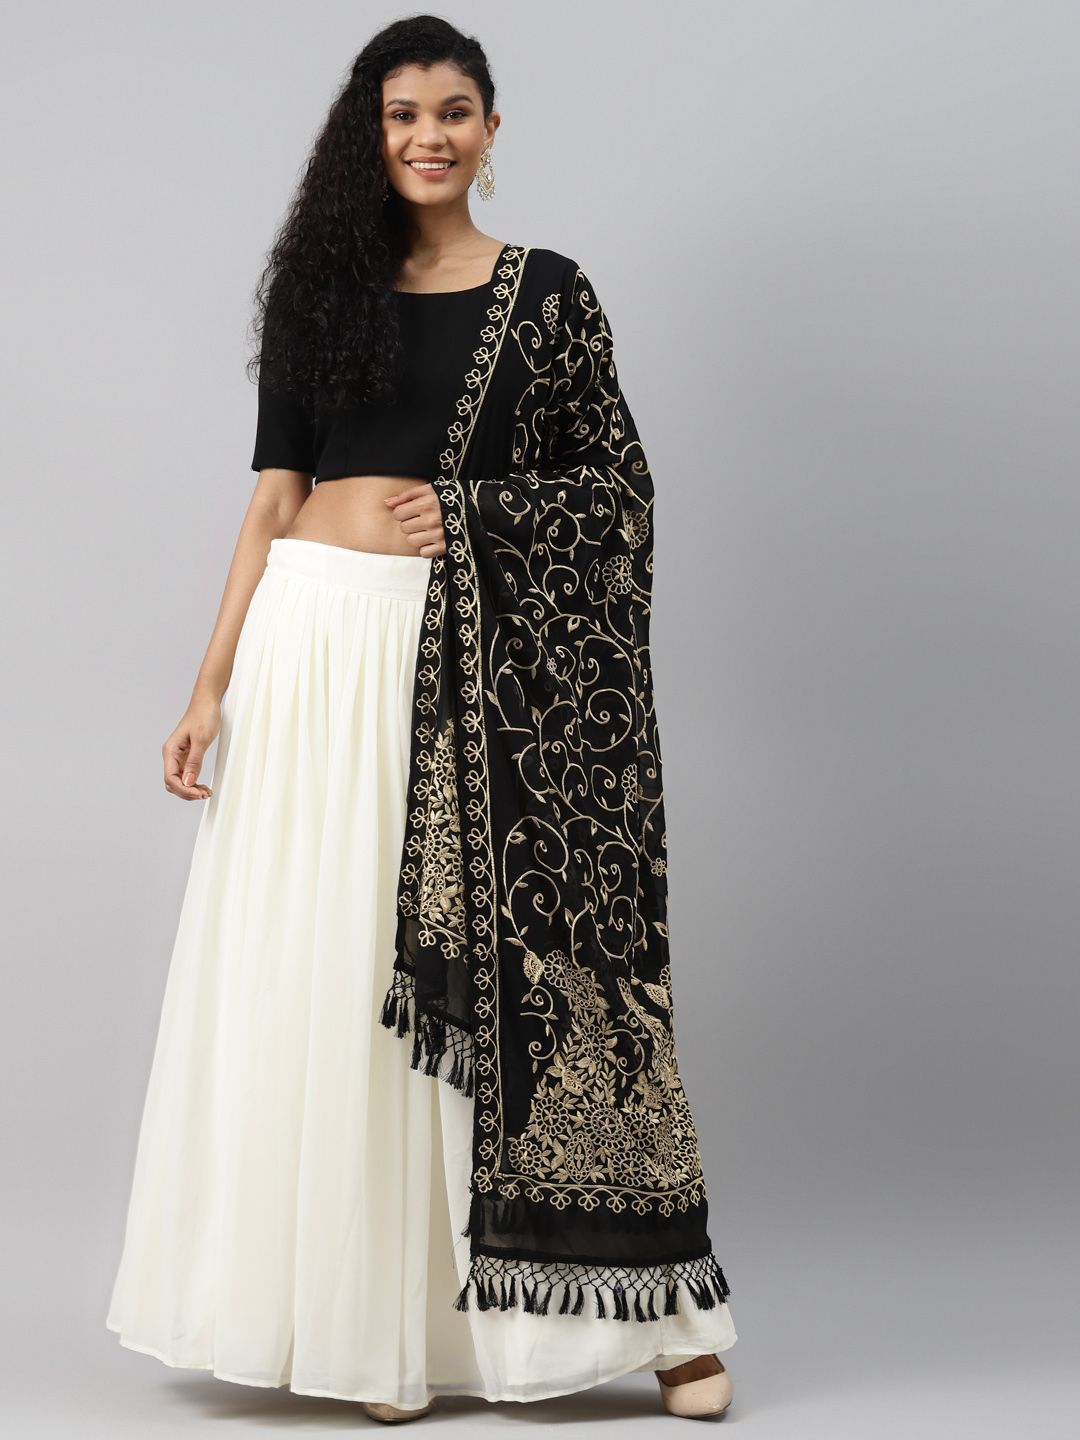 Readiprint Fashions Off-White & Black Solid Semi-Stitched Lehenga & Blouse with Dupatta Price in India